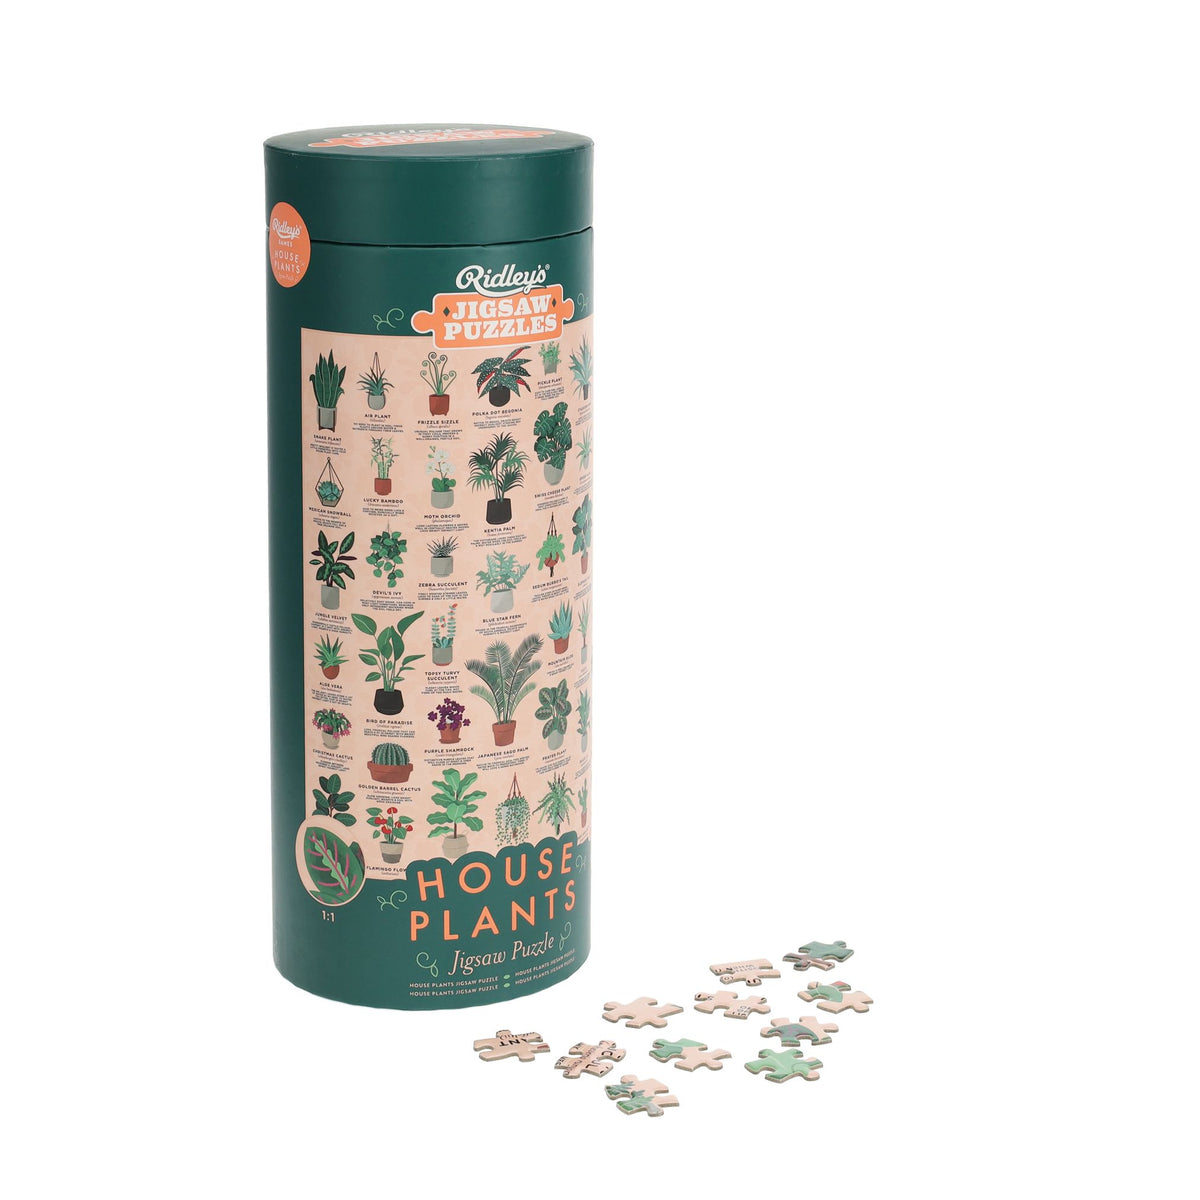 Ridley's Games House Plants 1000 Piece Jigsaw Puzzle